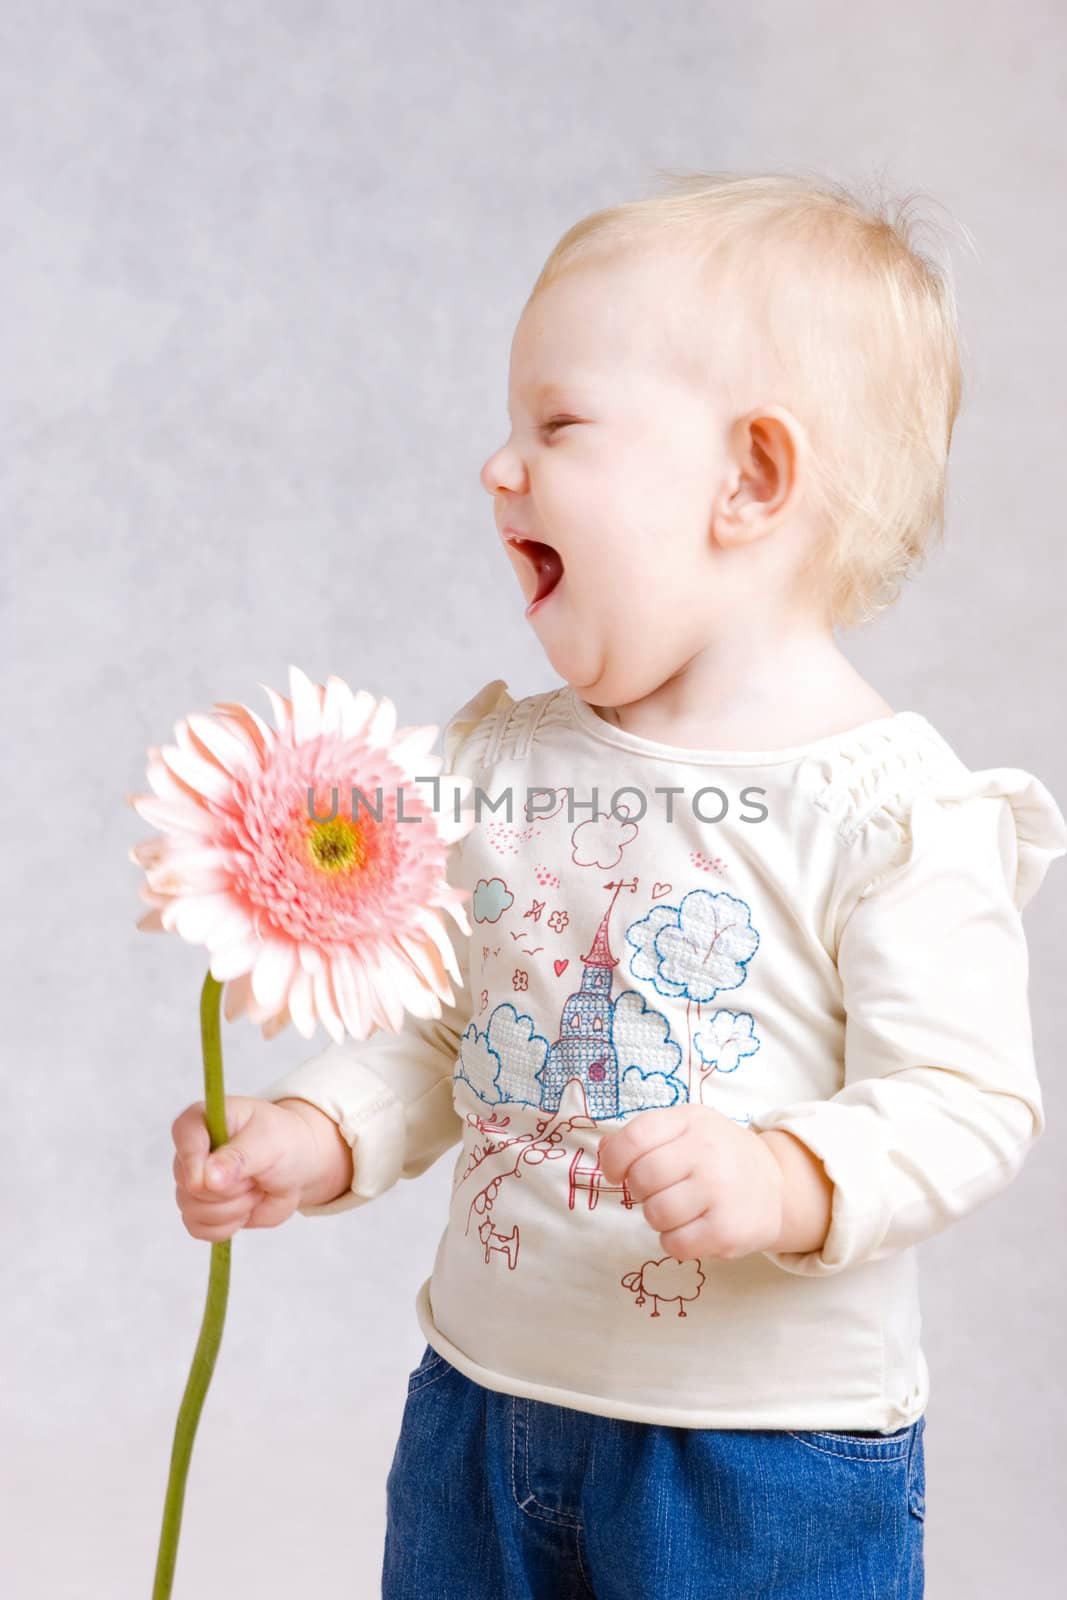 laughing with flower by vsurkov